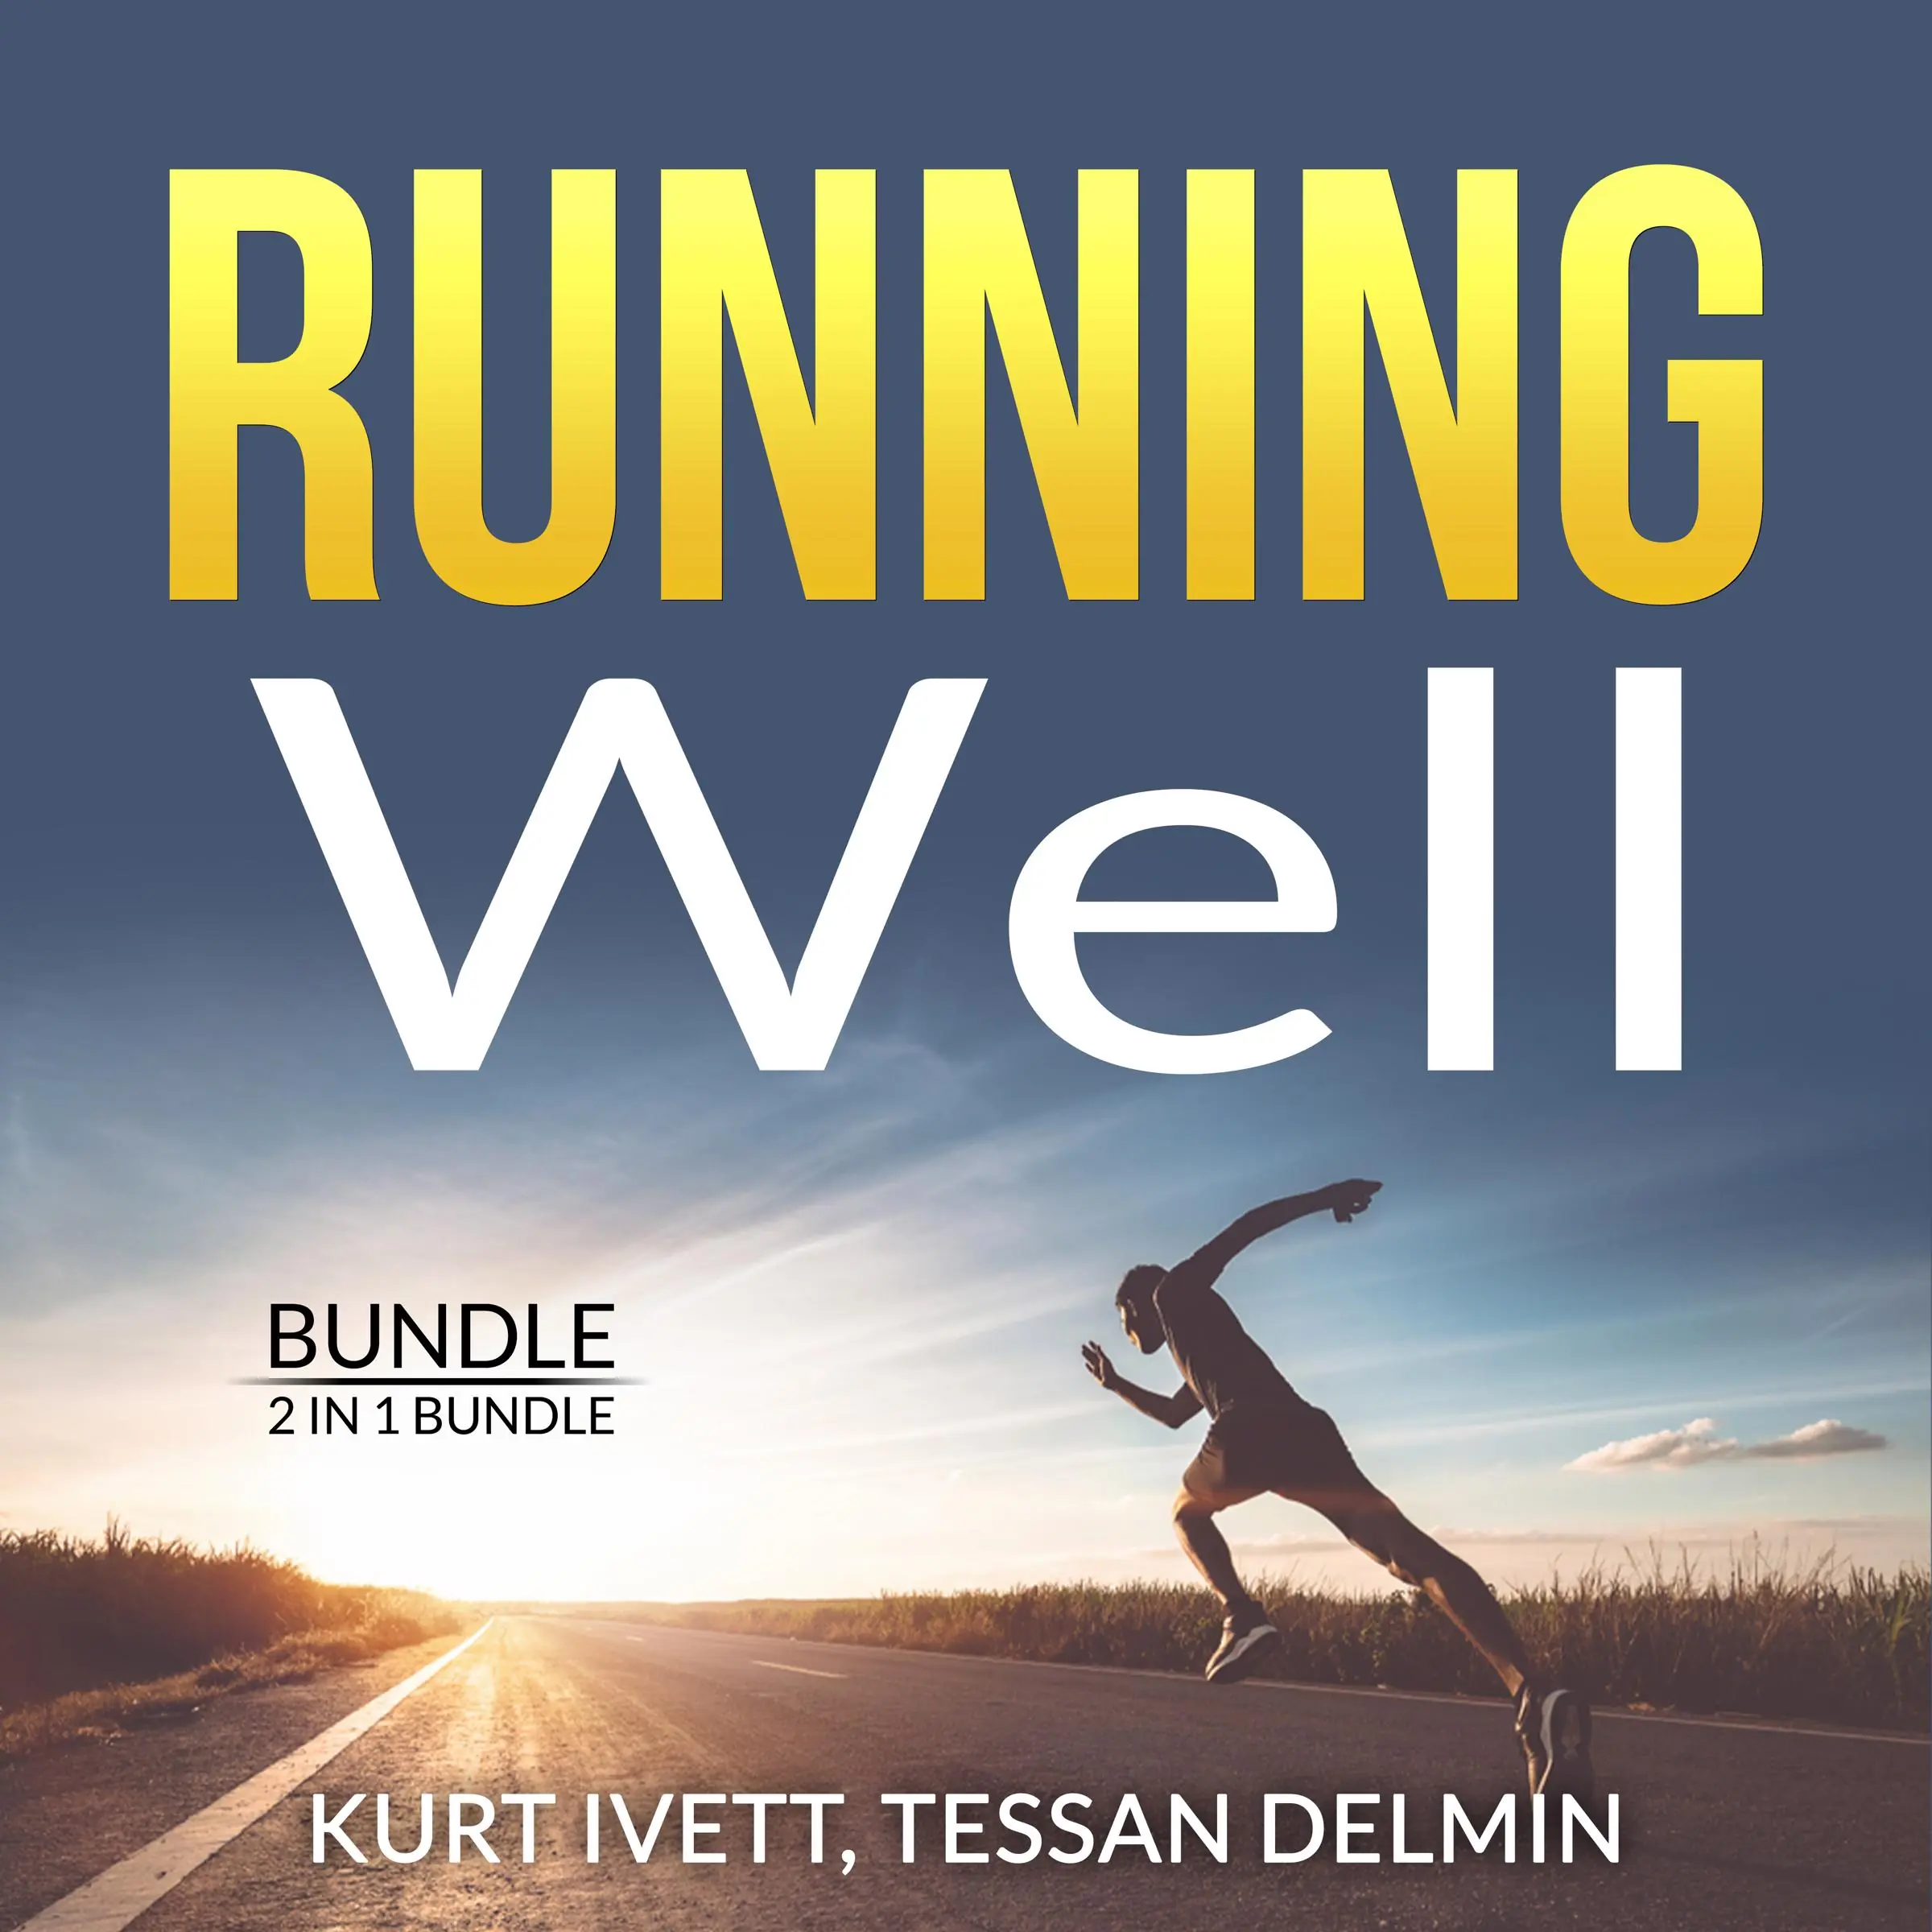 Running Well Bundle, 2 in 1 Bundle: Running Made Easy, Happy Runner Audiobook by and Tessan Delmin